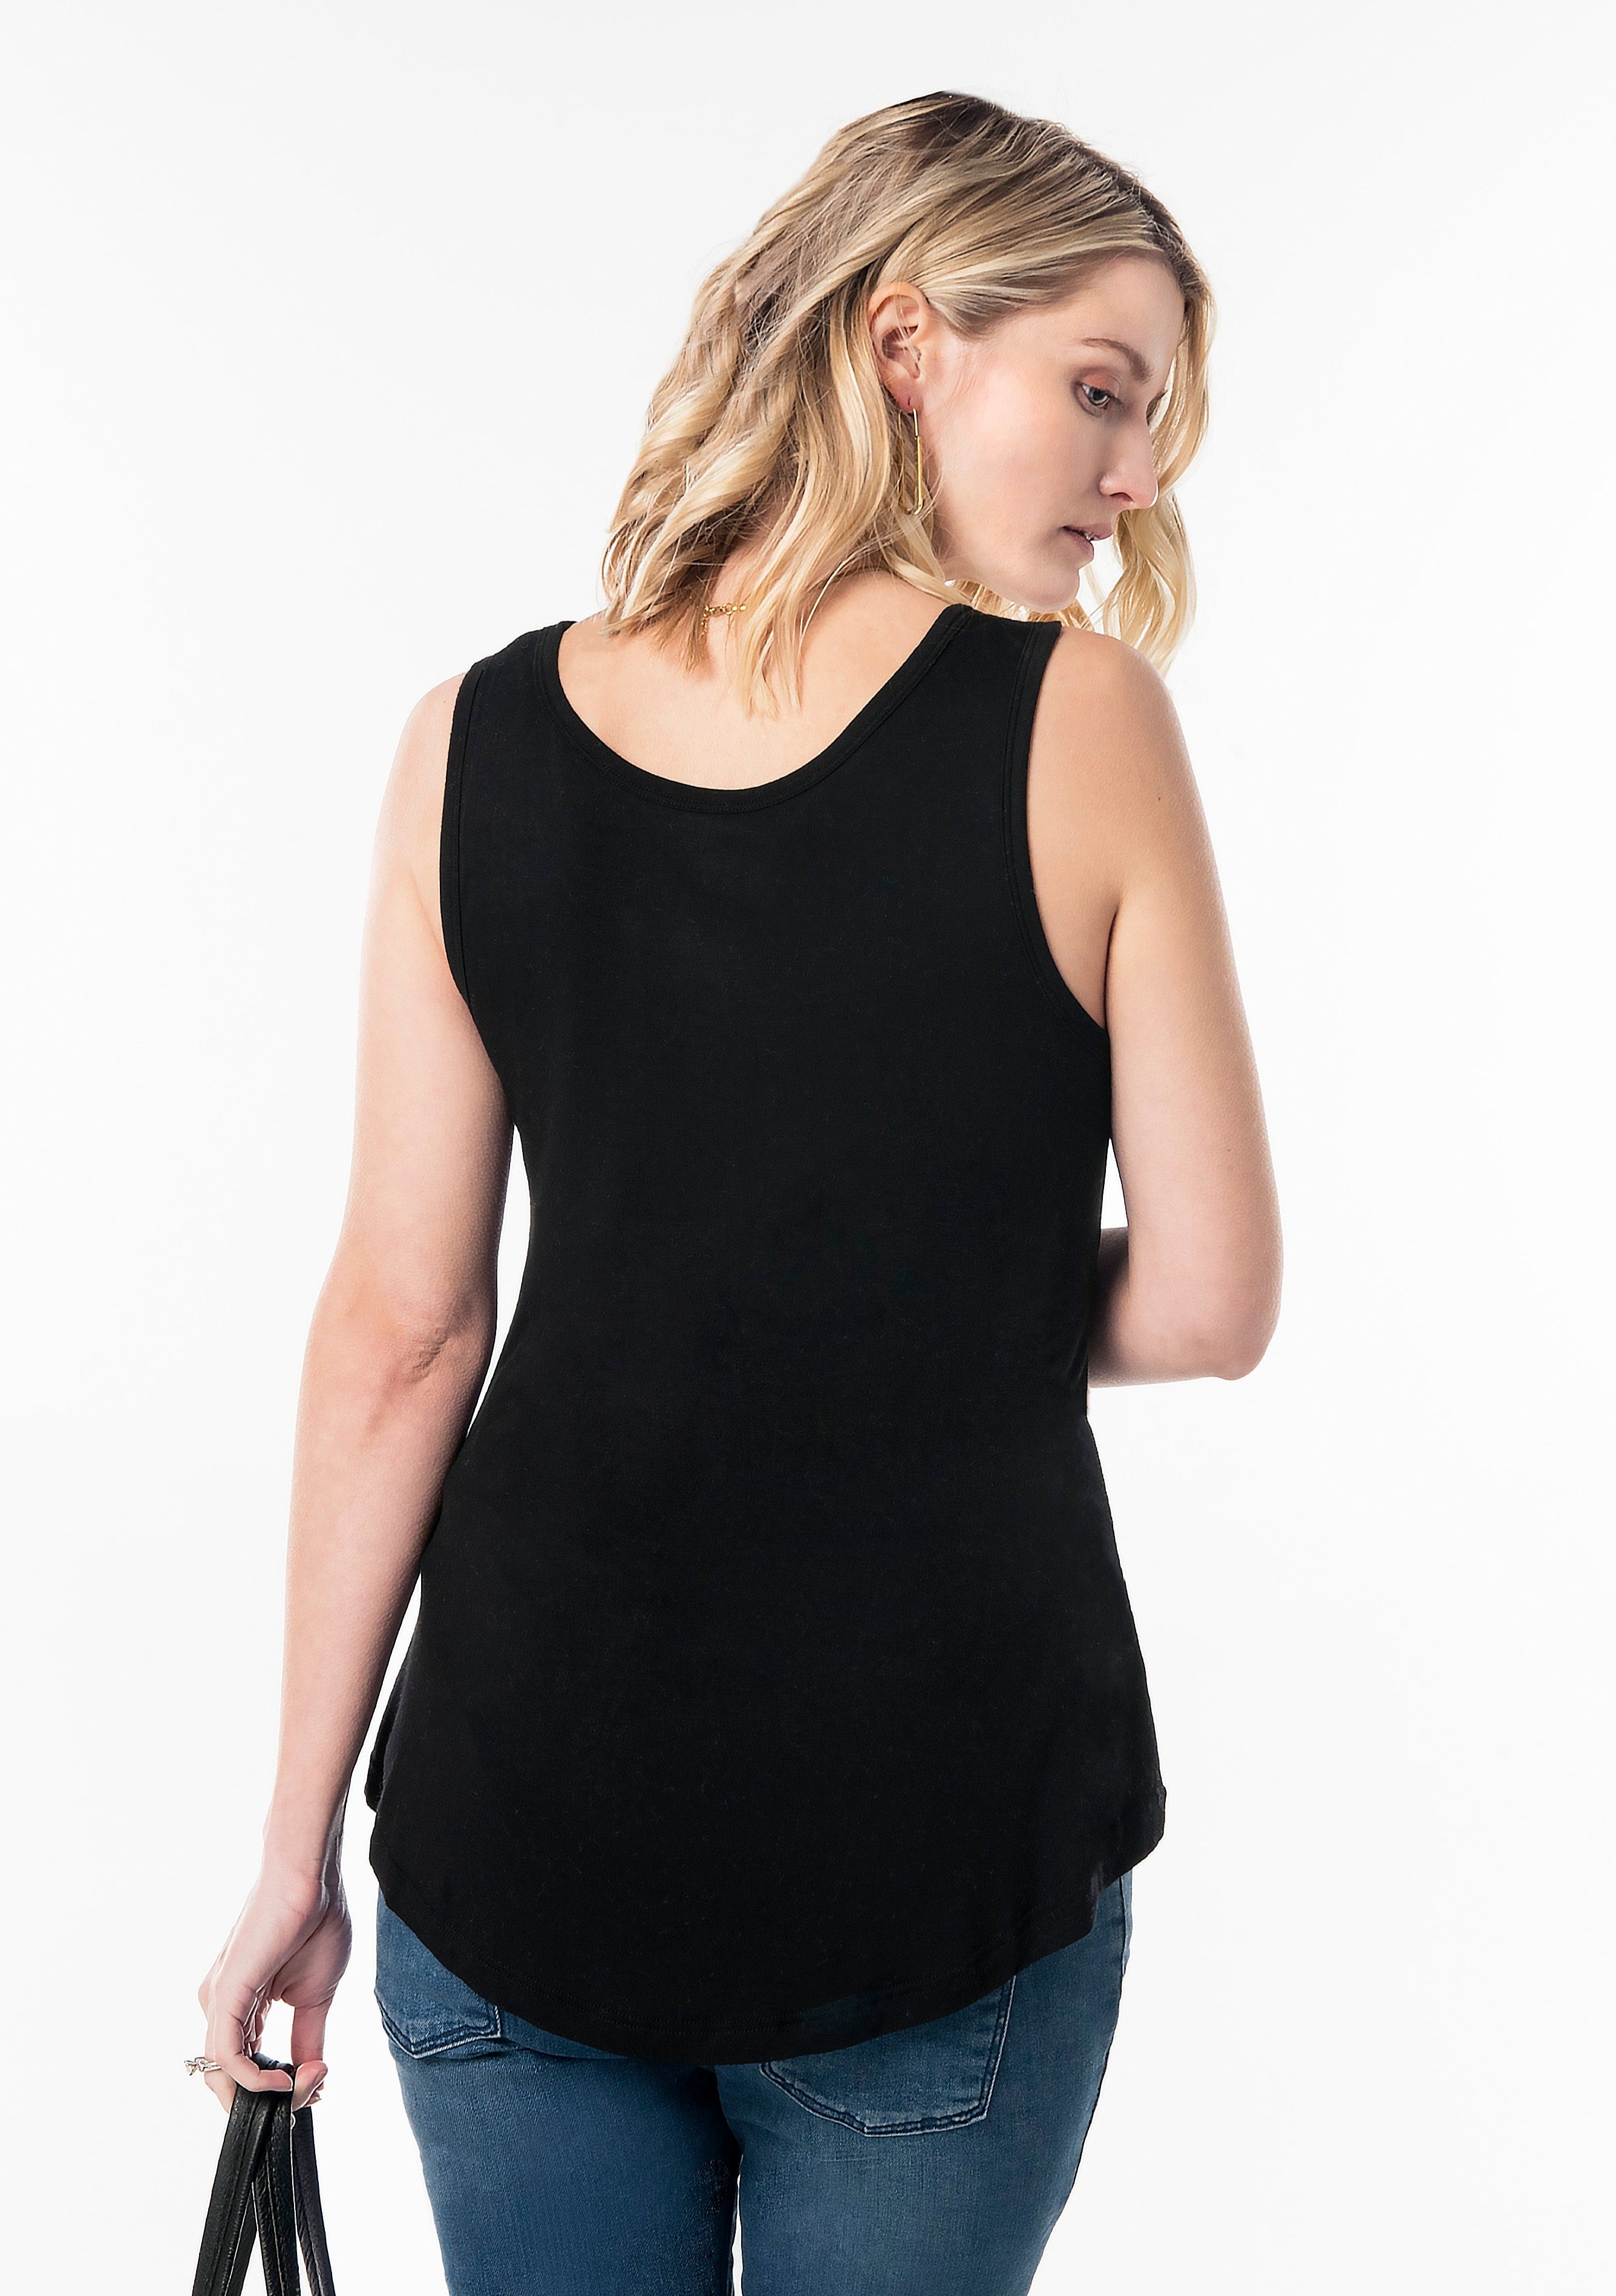 Luxury MARION bamboo maternity and nursing tank top with breastfeeding access. Available in black and white.